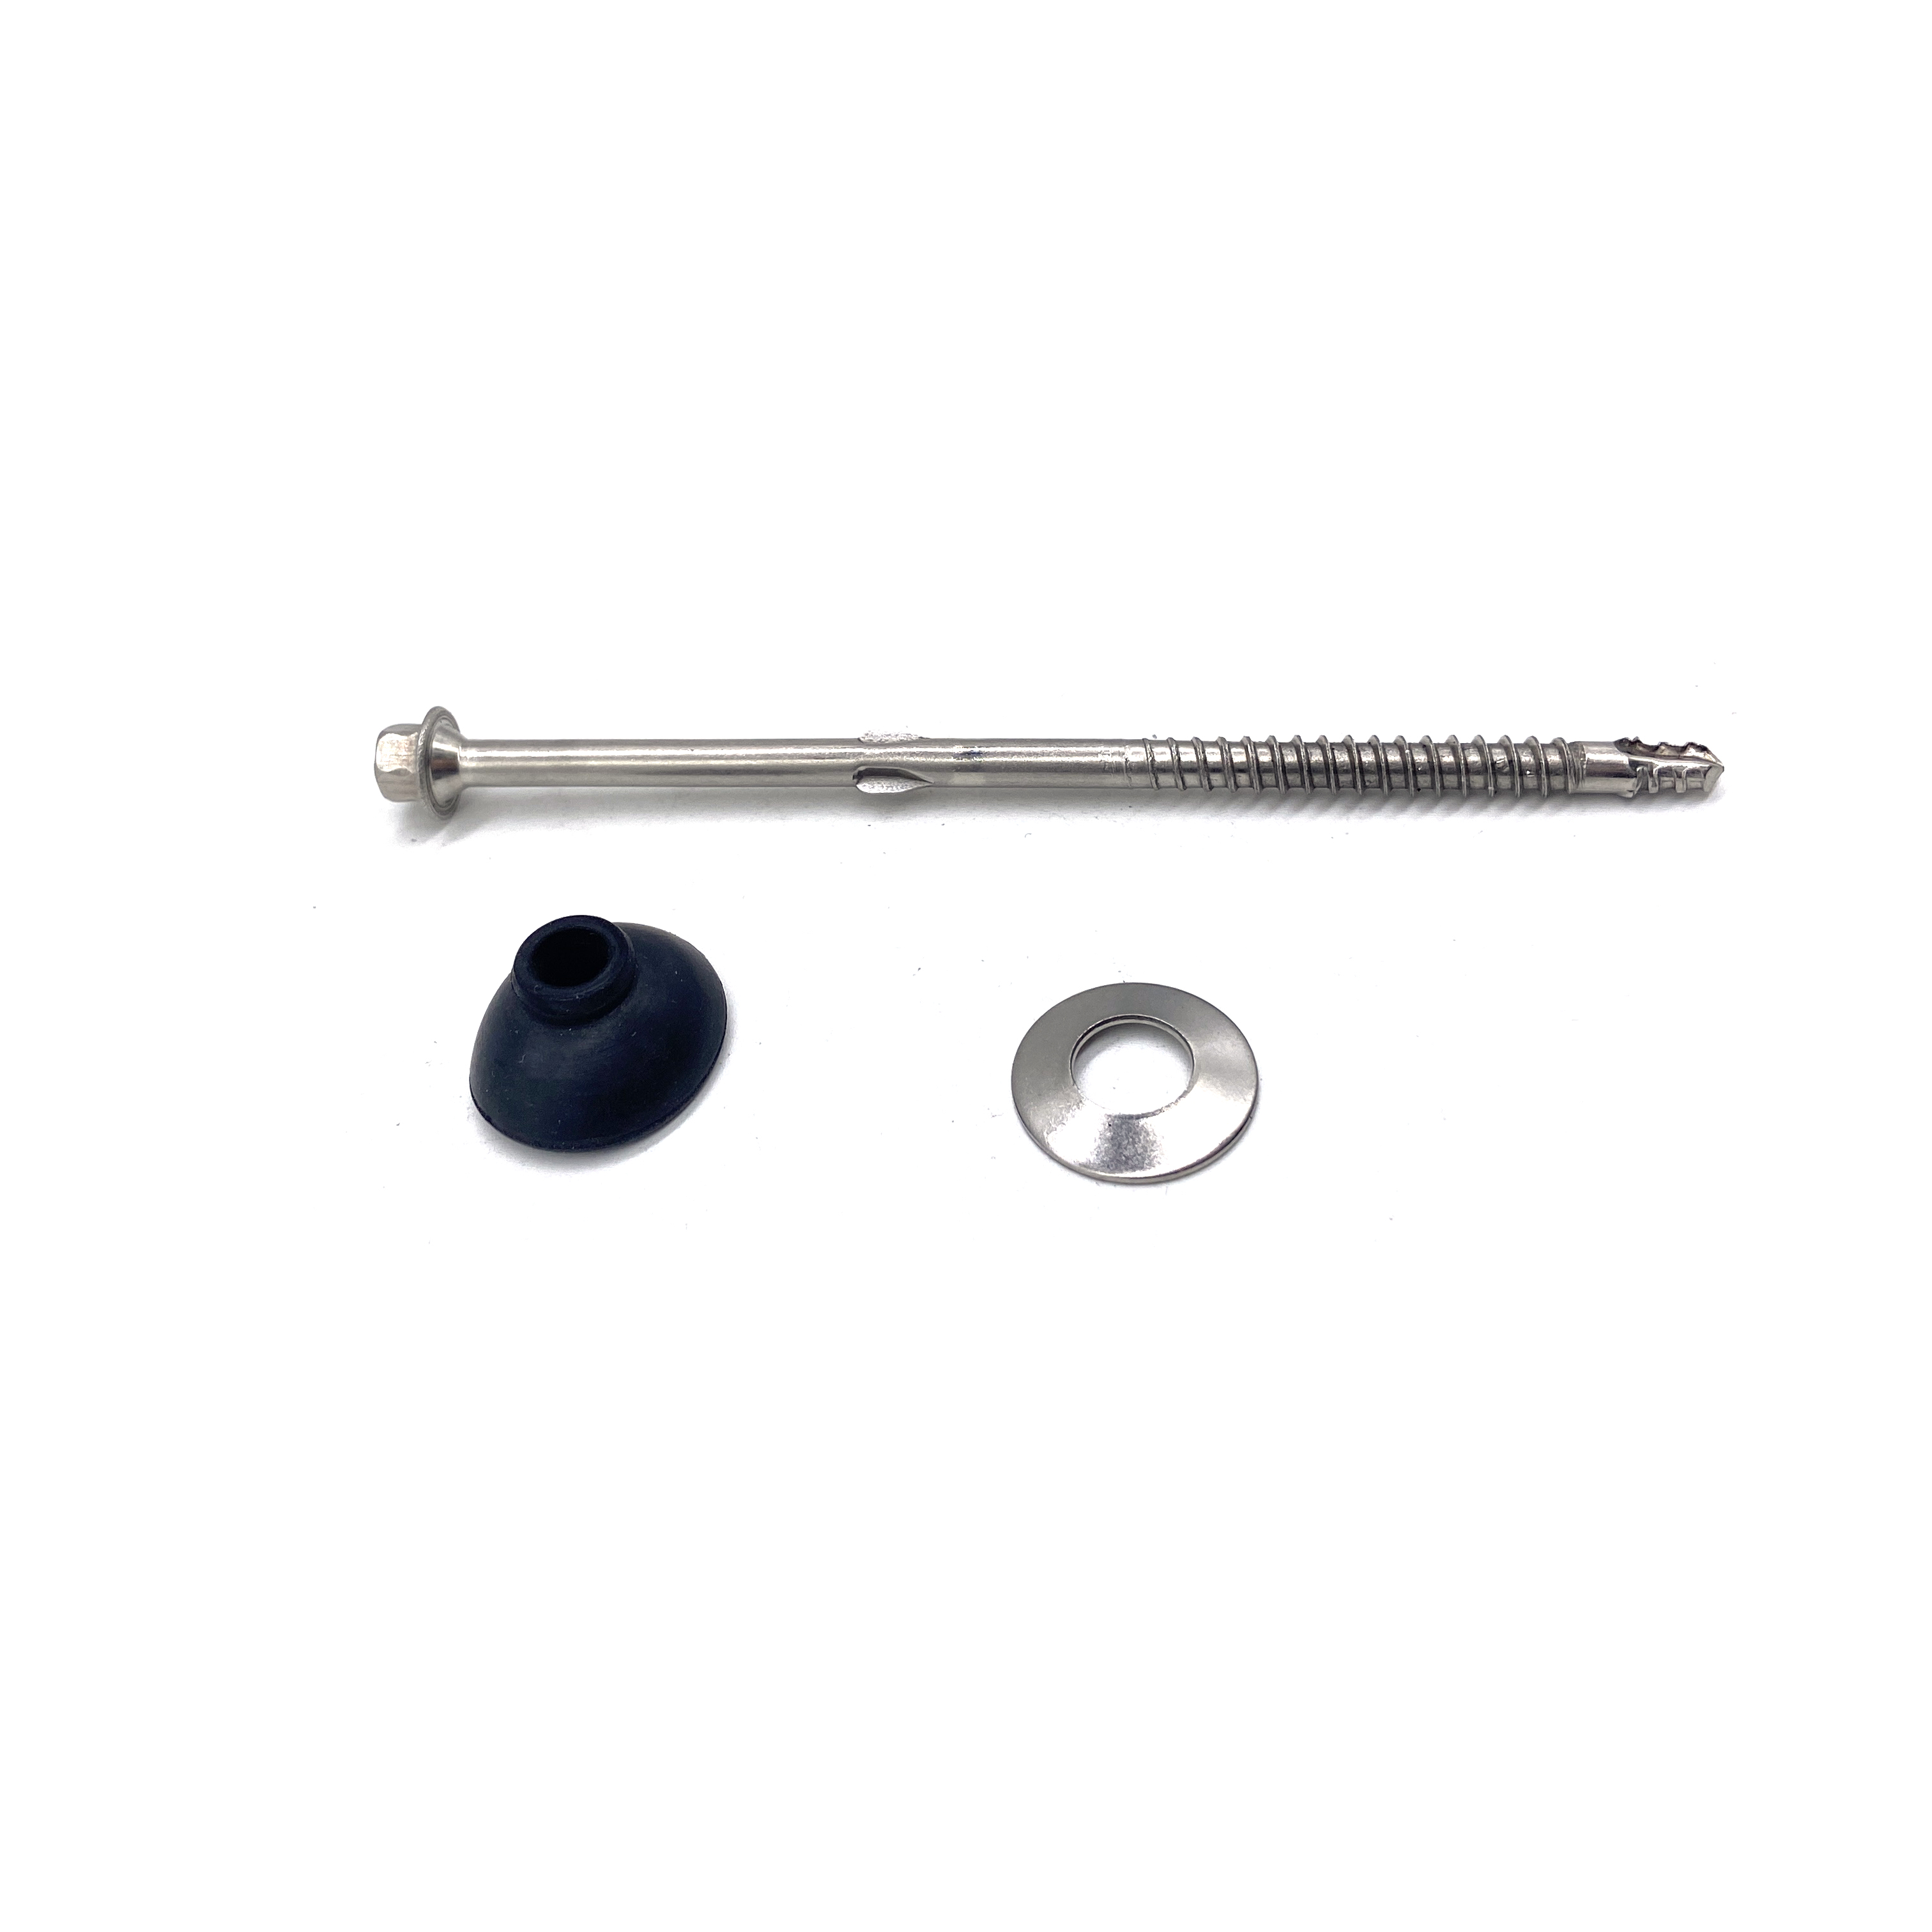 Stainless Steel Hex Flange Head Bi-Metal Self Drilling Screw for Solar Photovoltaic